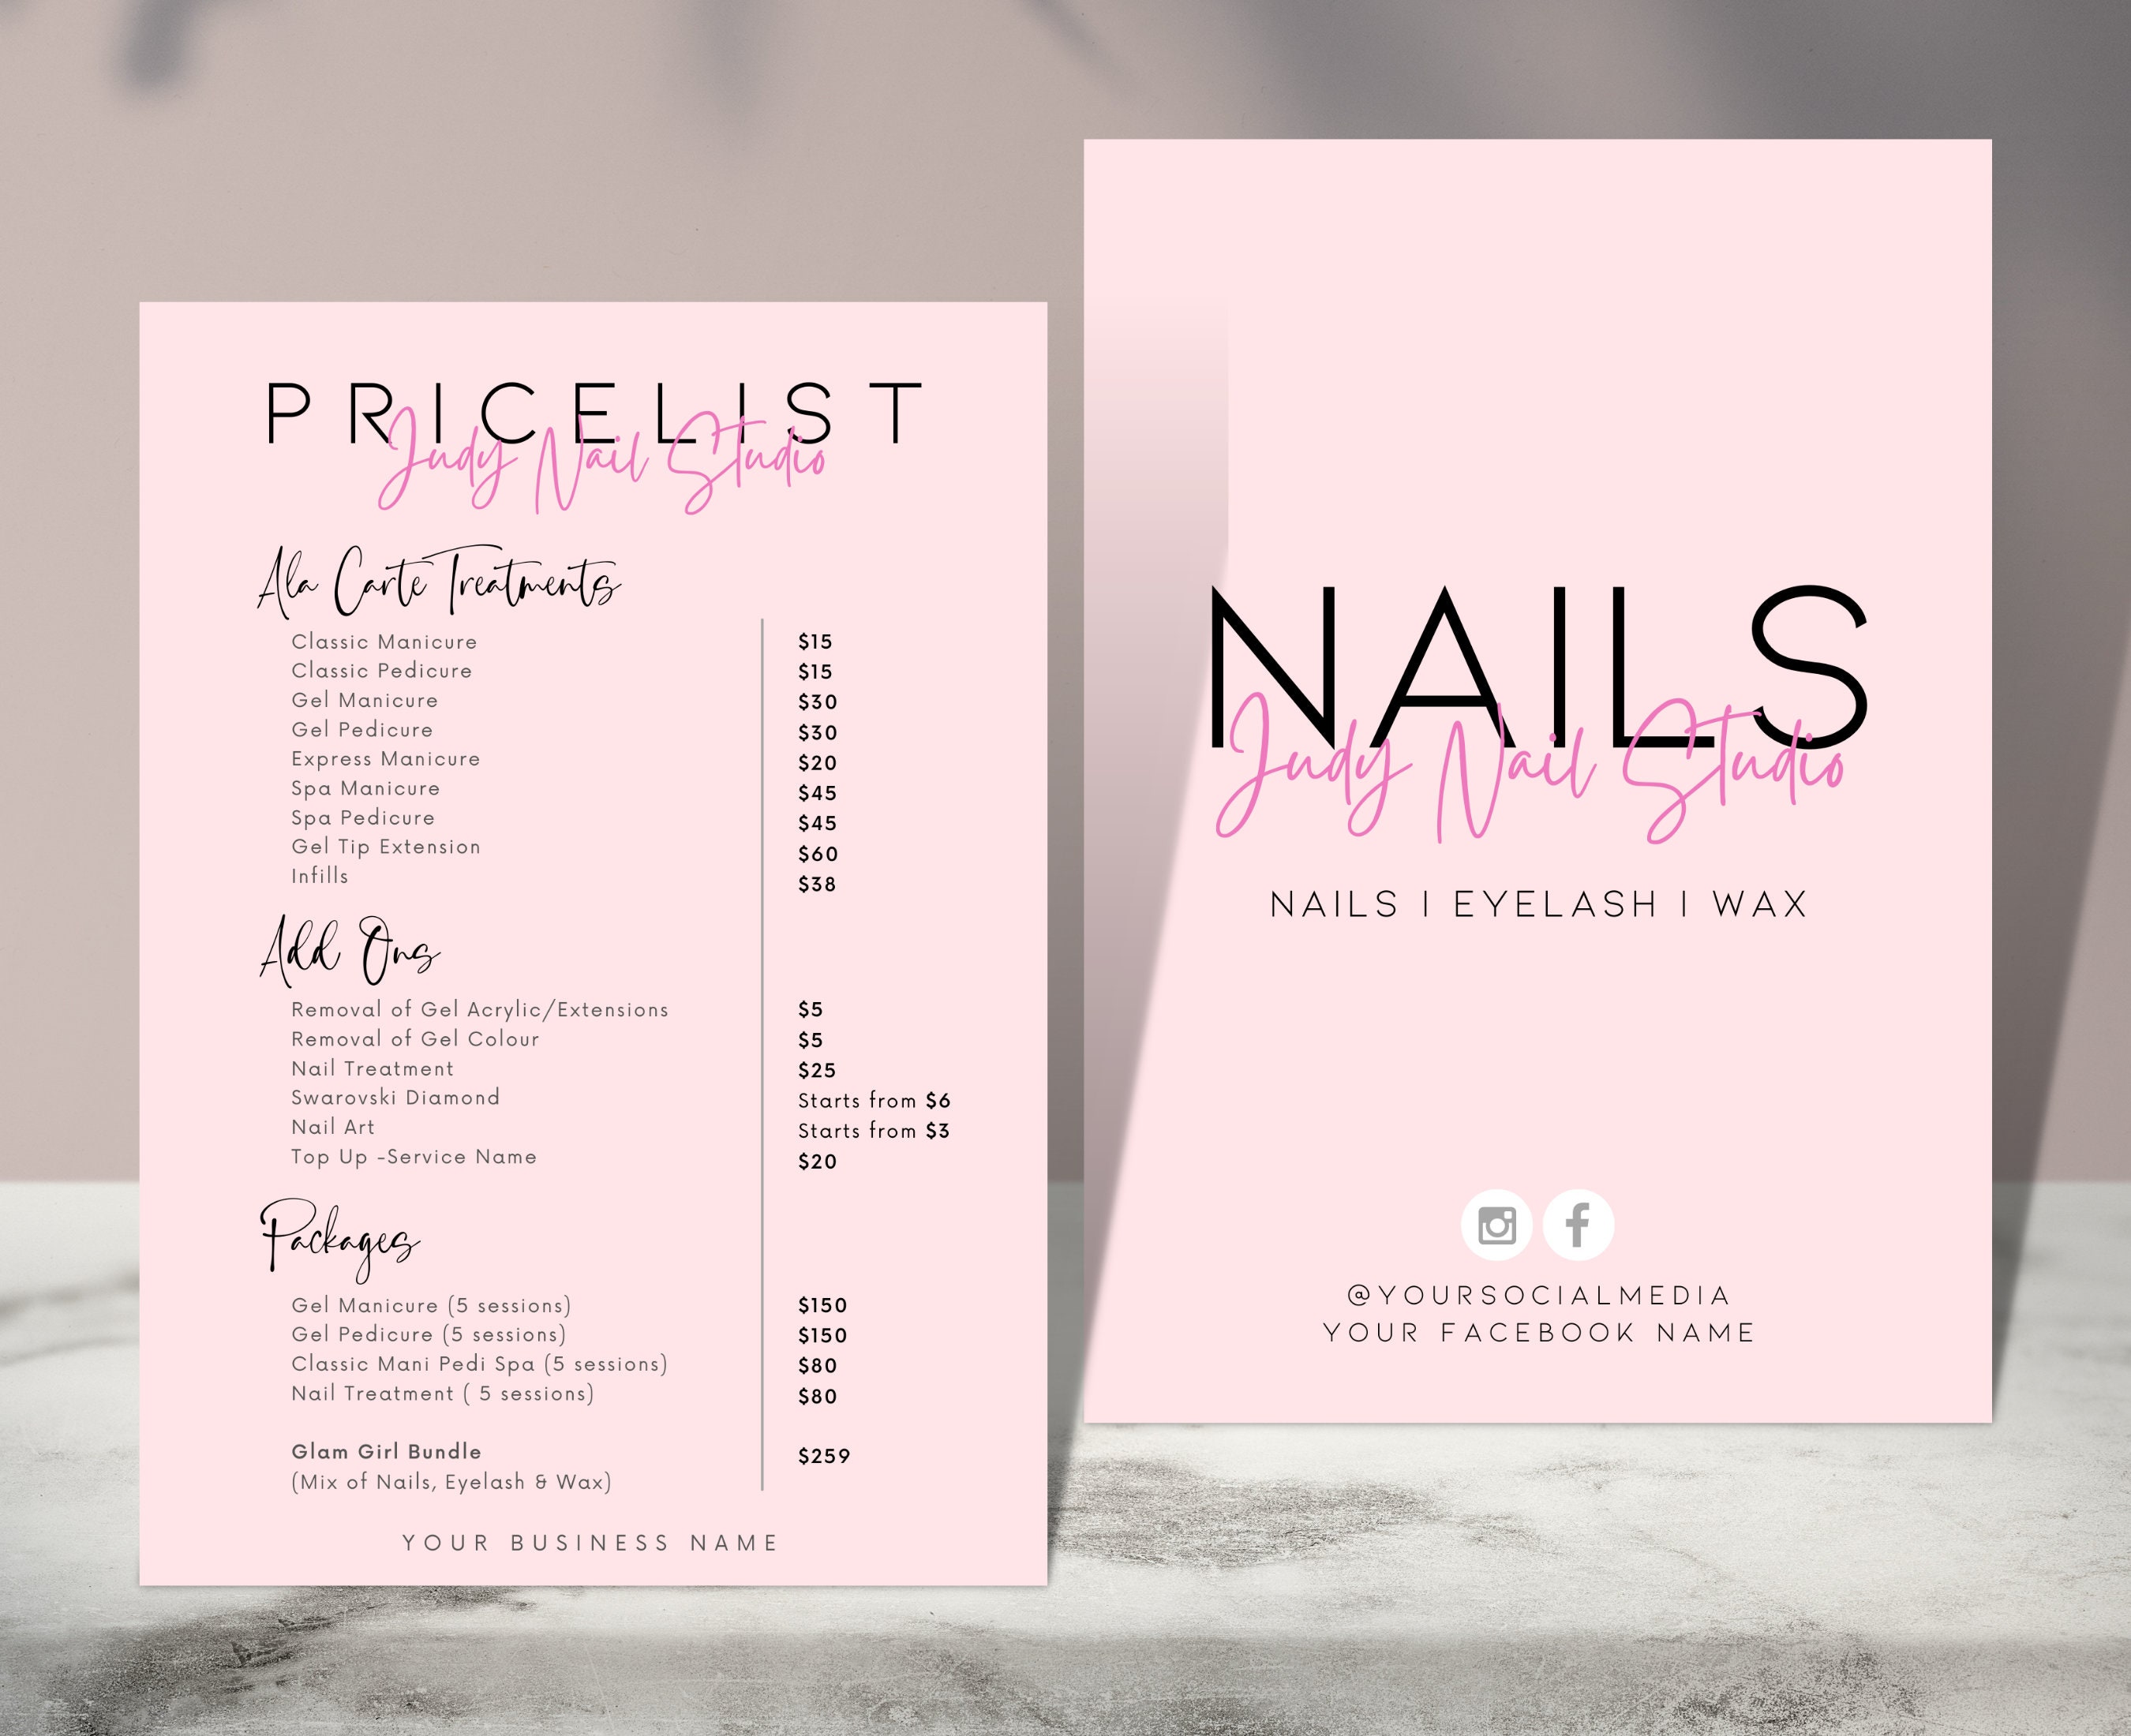 Manicure and Pedicure Prices - wide 3